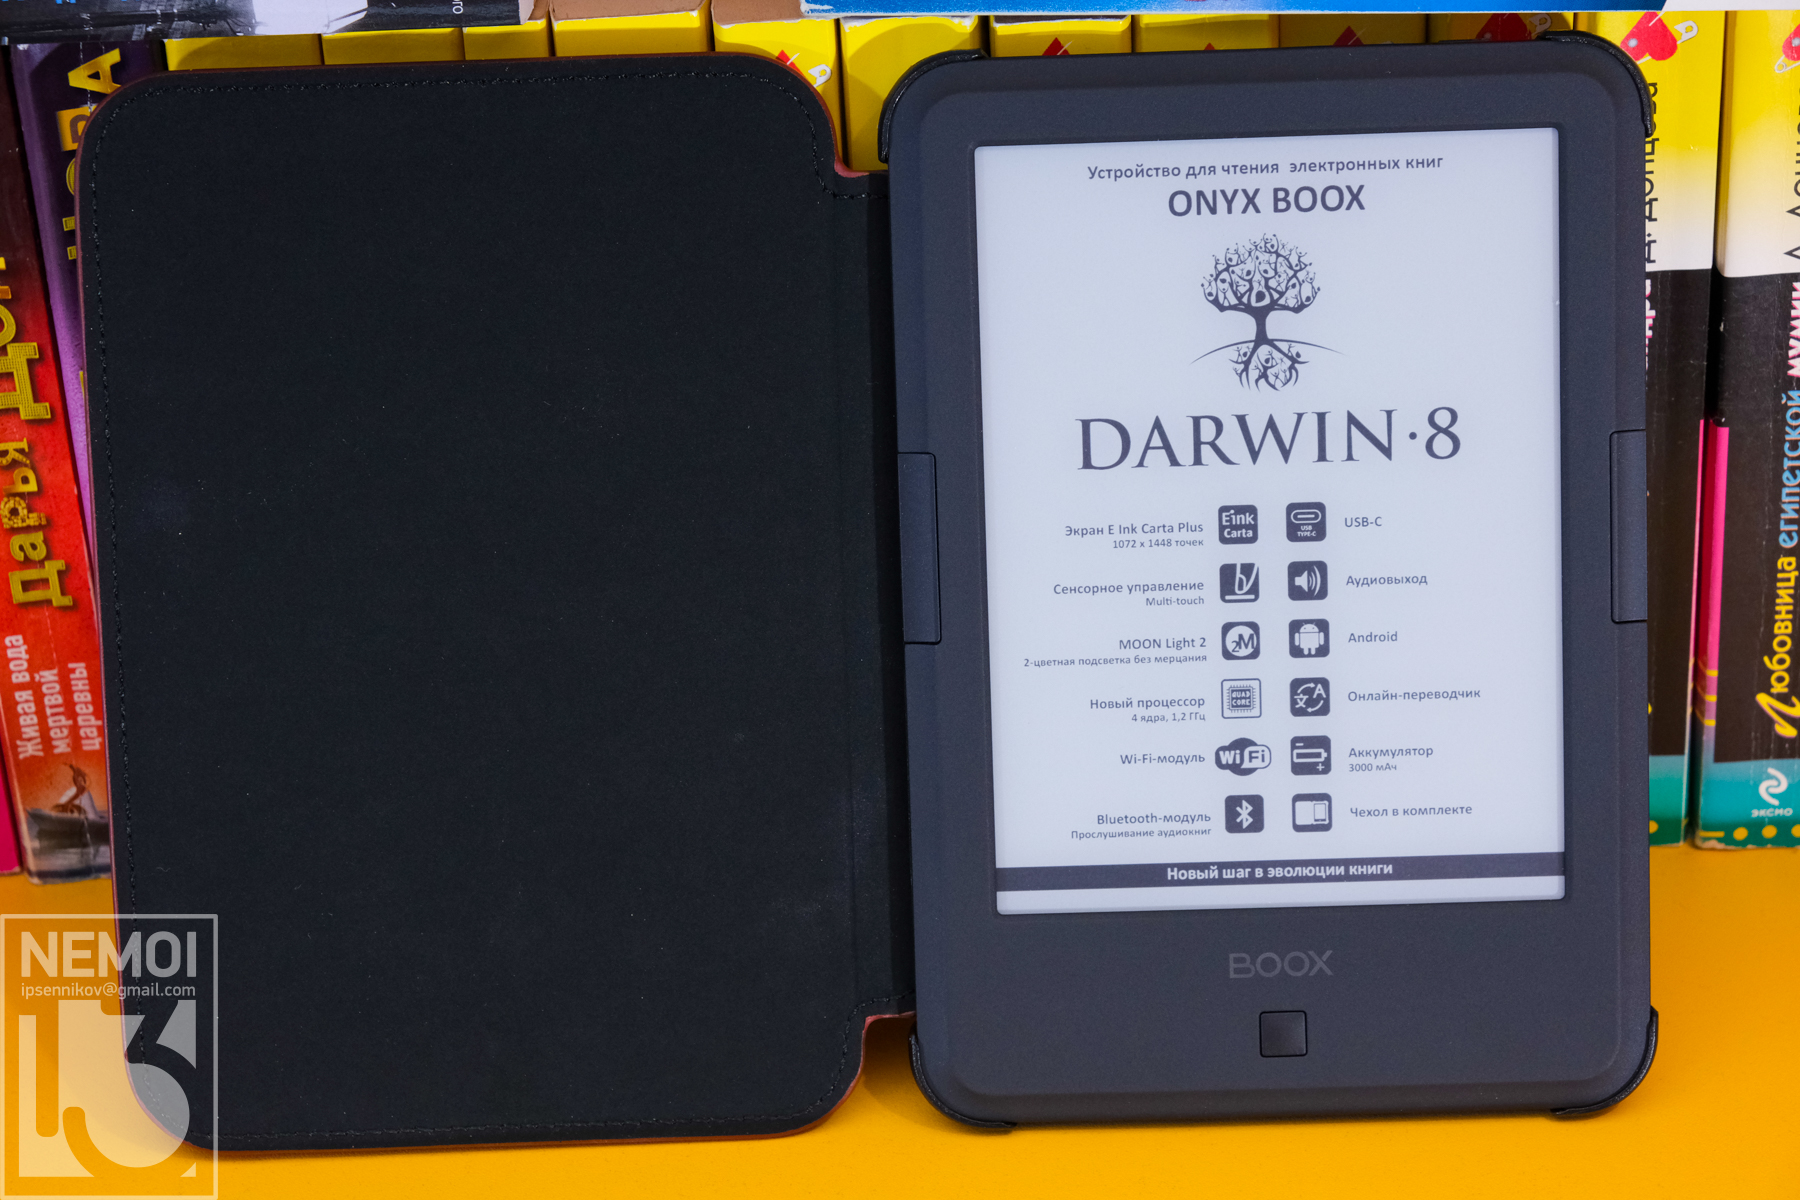 Onyx Boox Darwin 8 e-reader review: Practical and recognisable